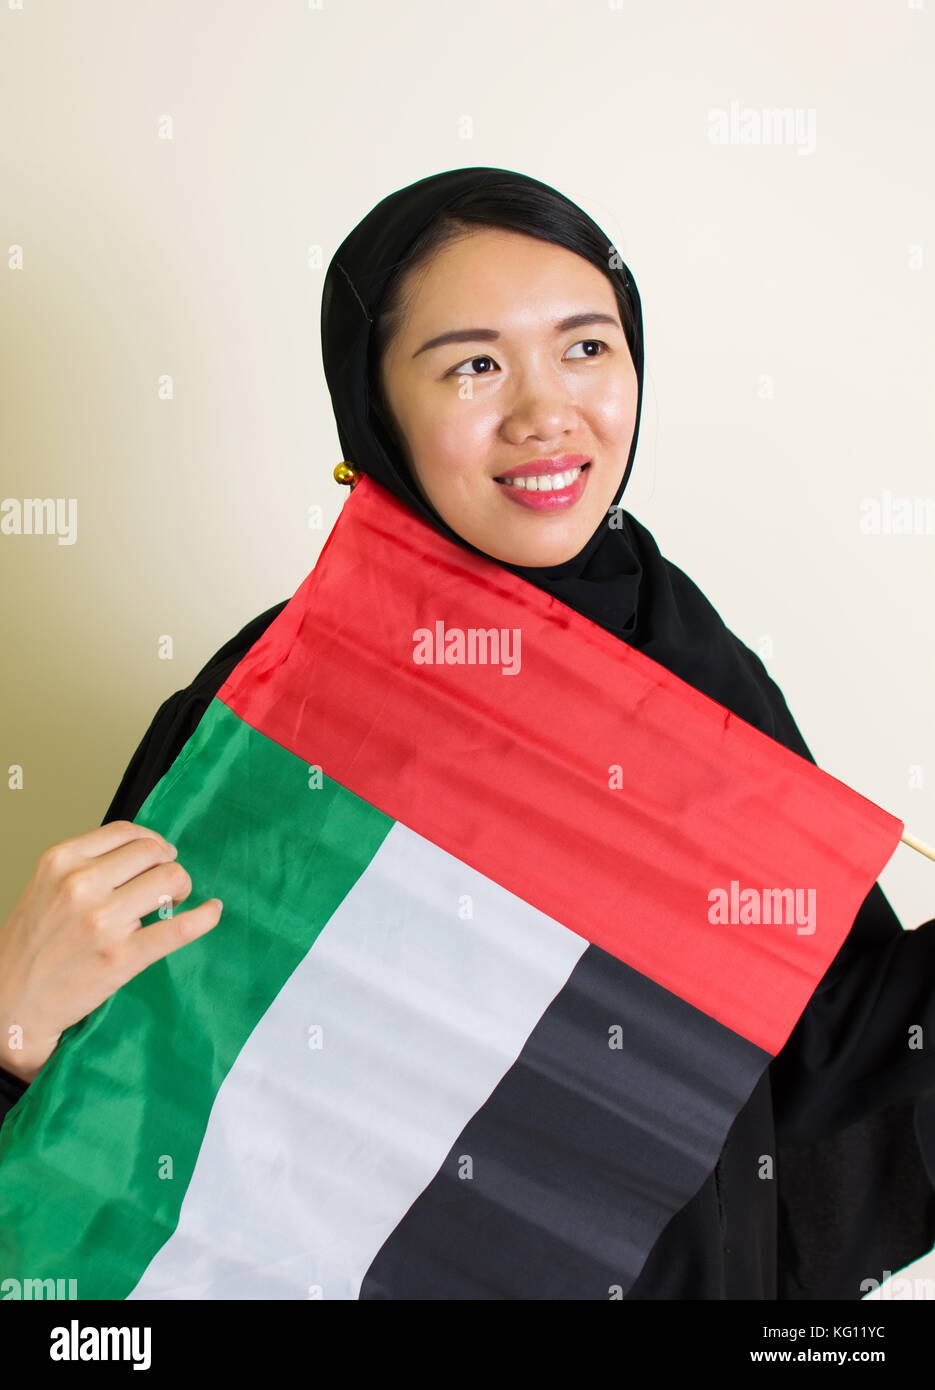 Muslim woman with the United Arab Emirates flag Stock Photo